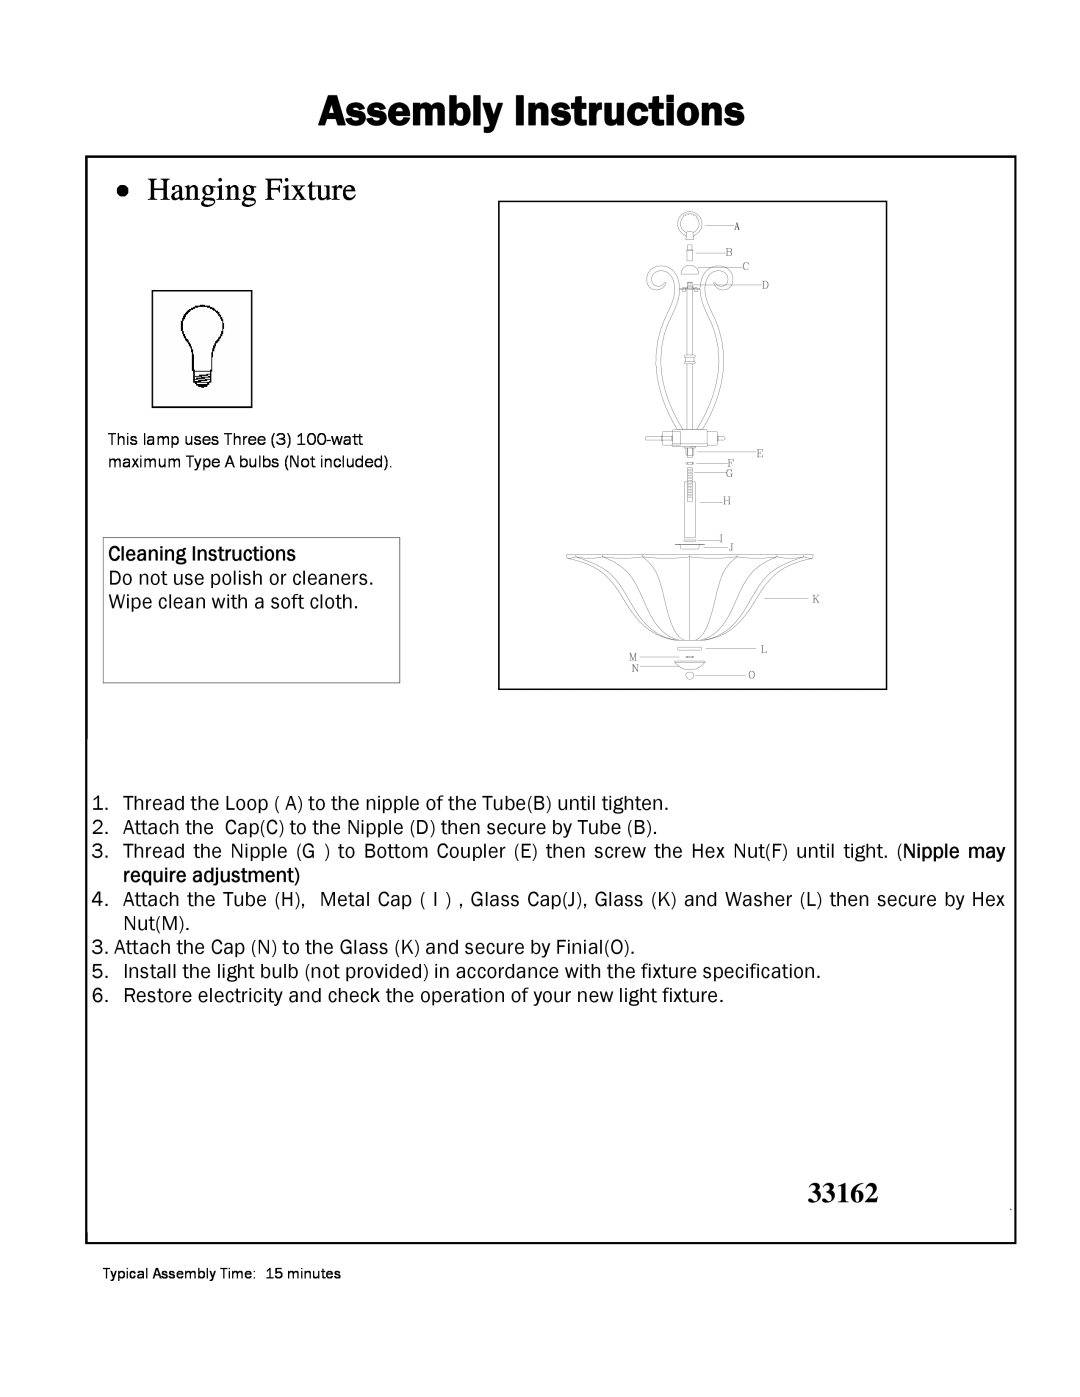 Triarch 33162 manual Assembly Instructions, Hanging Fixture, Cleaning Instructions 